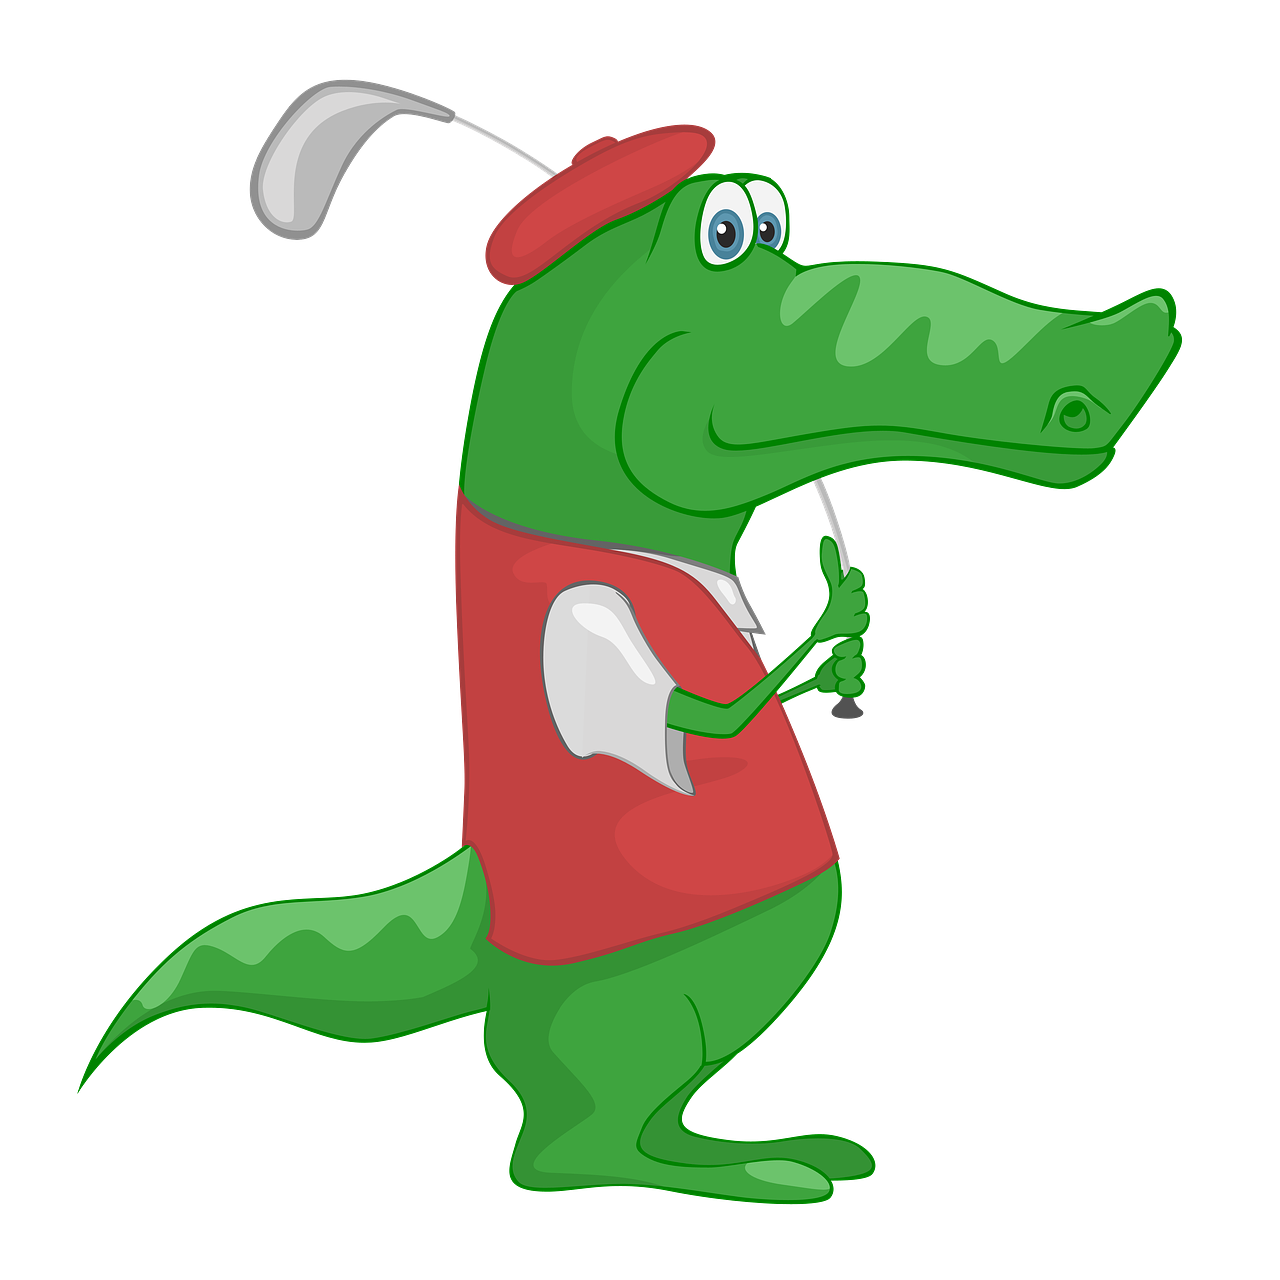 a cartoon alligator wearing a hat and holding a golf club, an illustration of, cobra, red and green color scheme, on a black background, tourist photo, computer generated